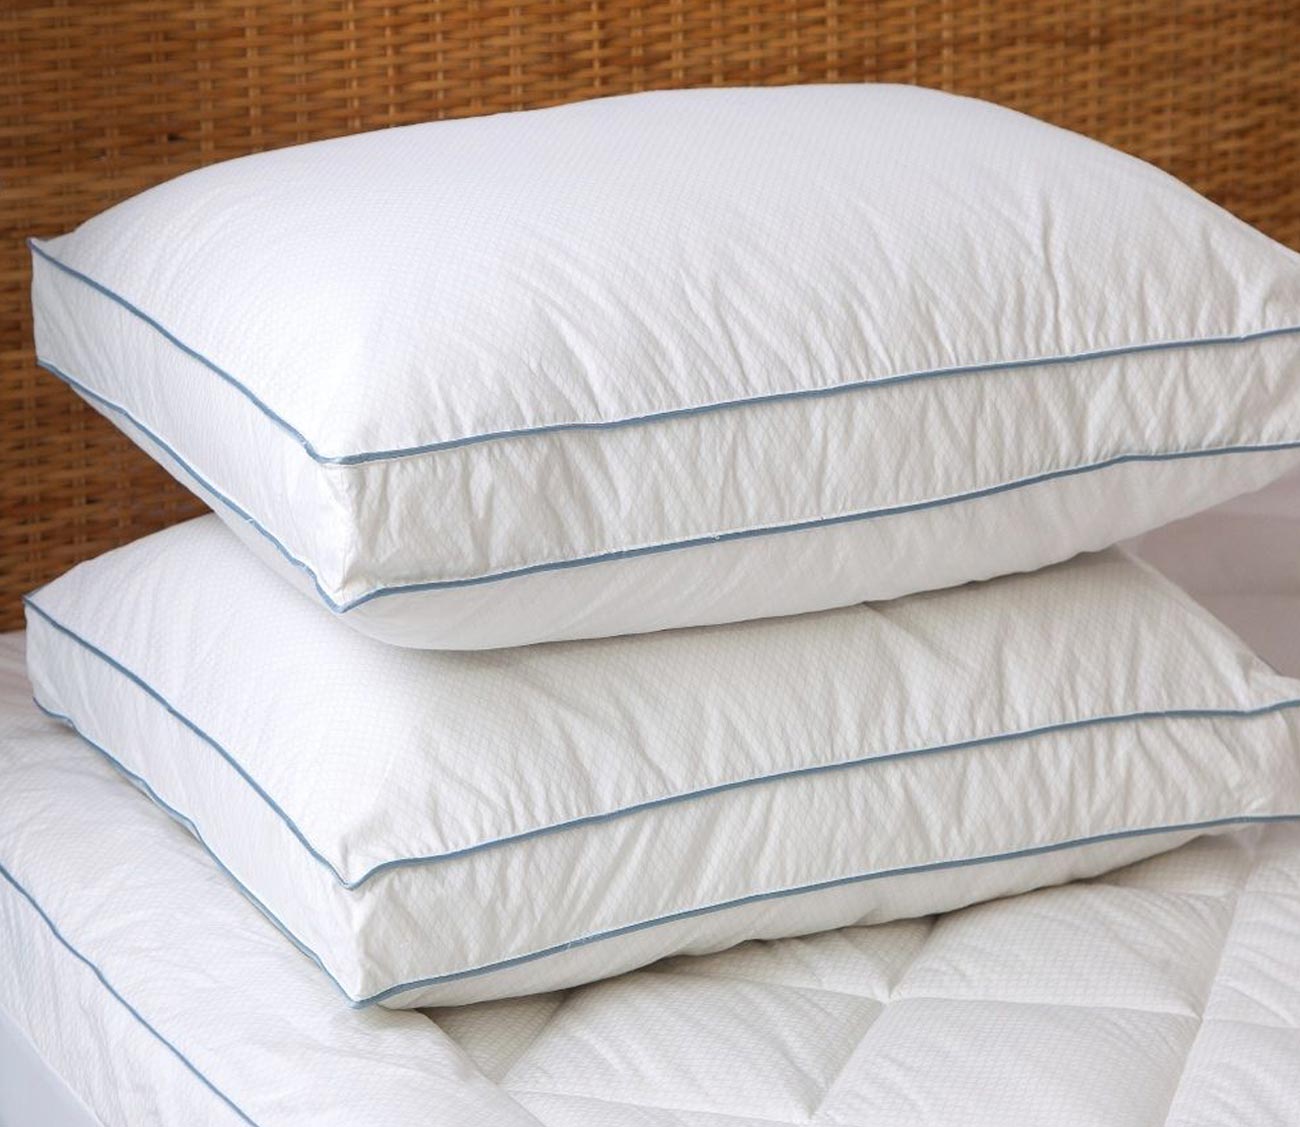 https://cdn.shopify.com/s/files/1/2420/9425/products/tempasleep-cooling-down-alternative-gusseted-pillow-by-allied-home-367225.jpg?v=1671251827